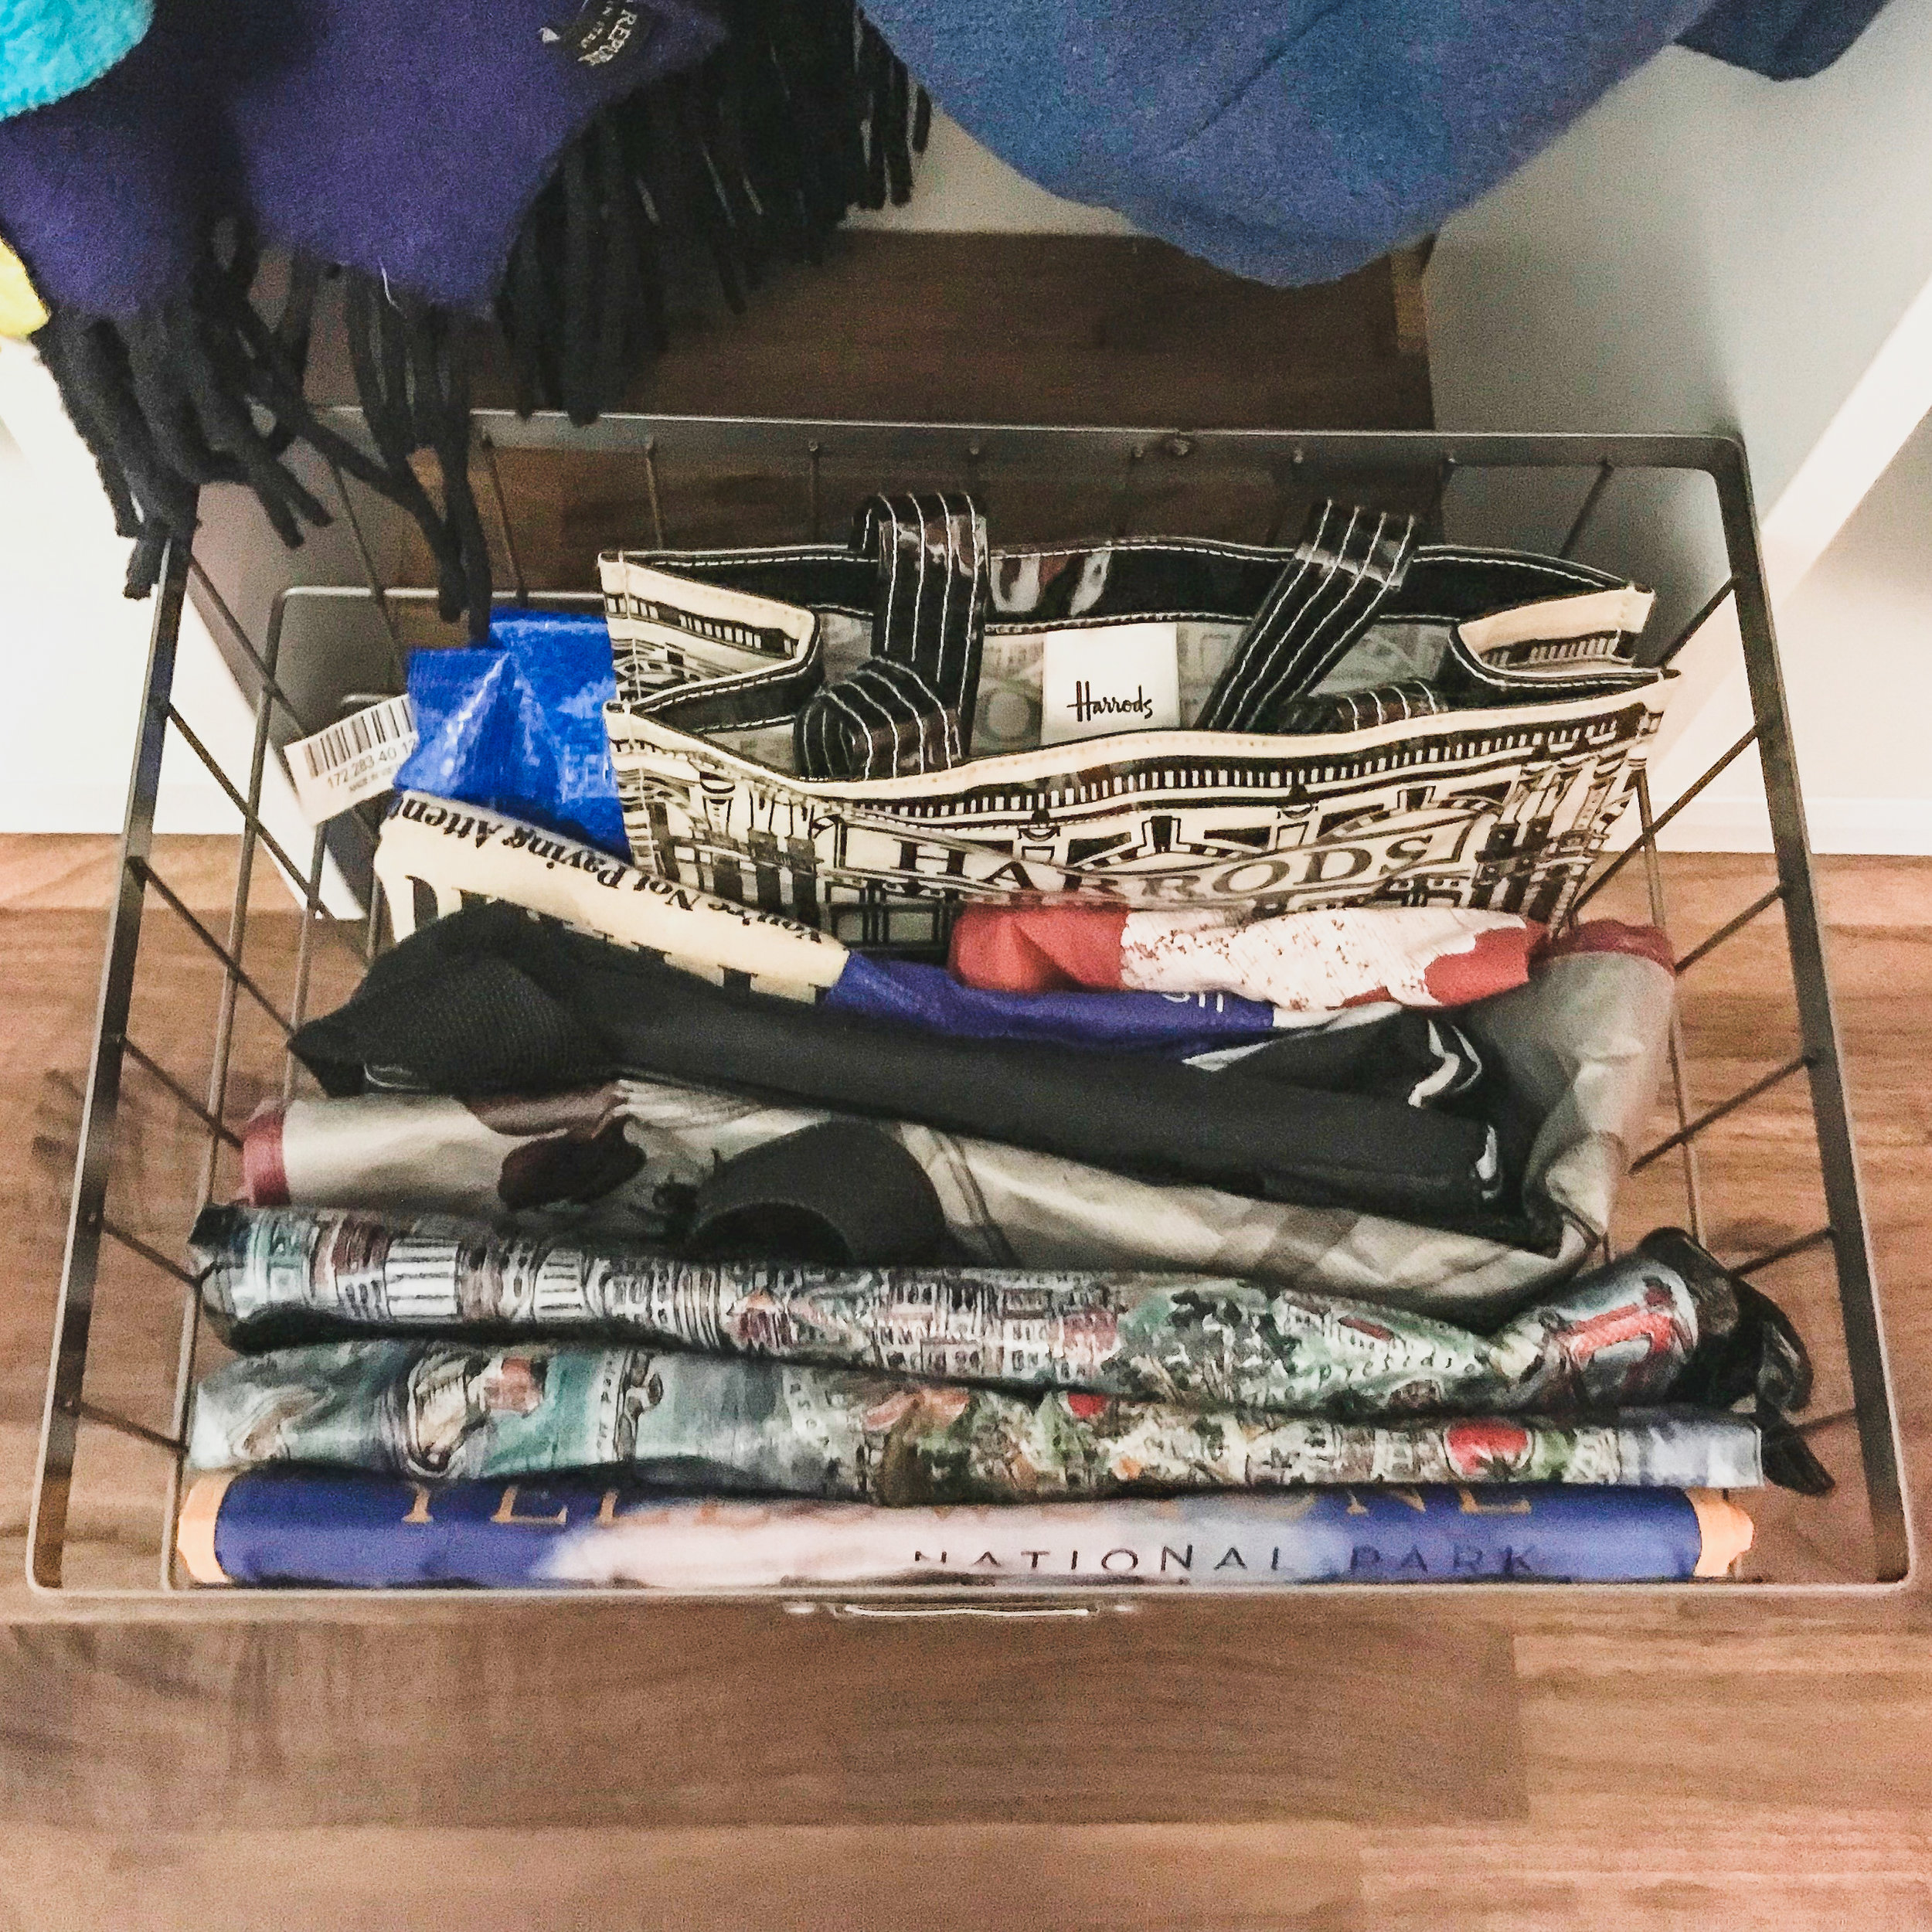 An old type drawer turned my kiddo's long abandoned rock collection into  joy : r/konmari